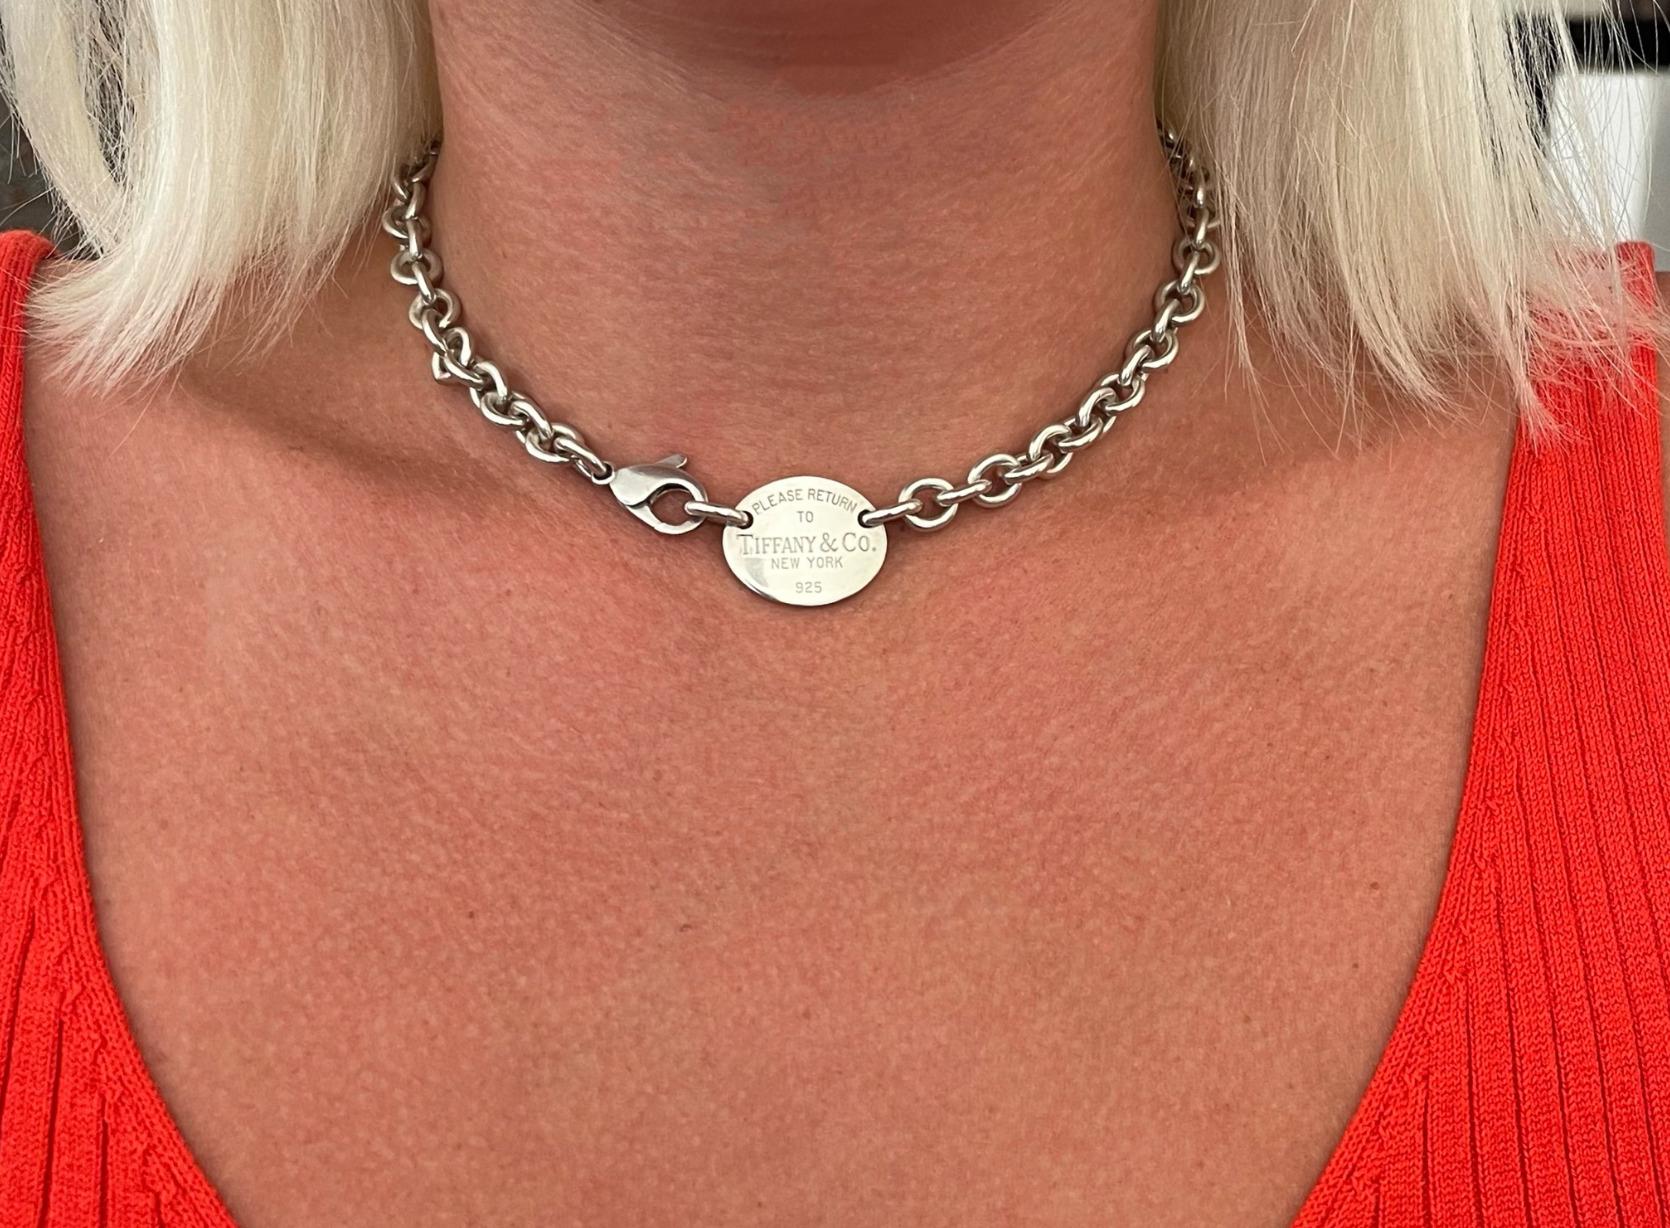 Return to Tiffany Tiffany & Co. Oval Tag Necklace in Silver In Excellent Condition For Sale In Honolulu, HI